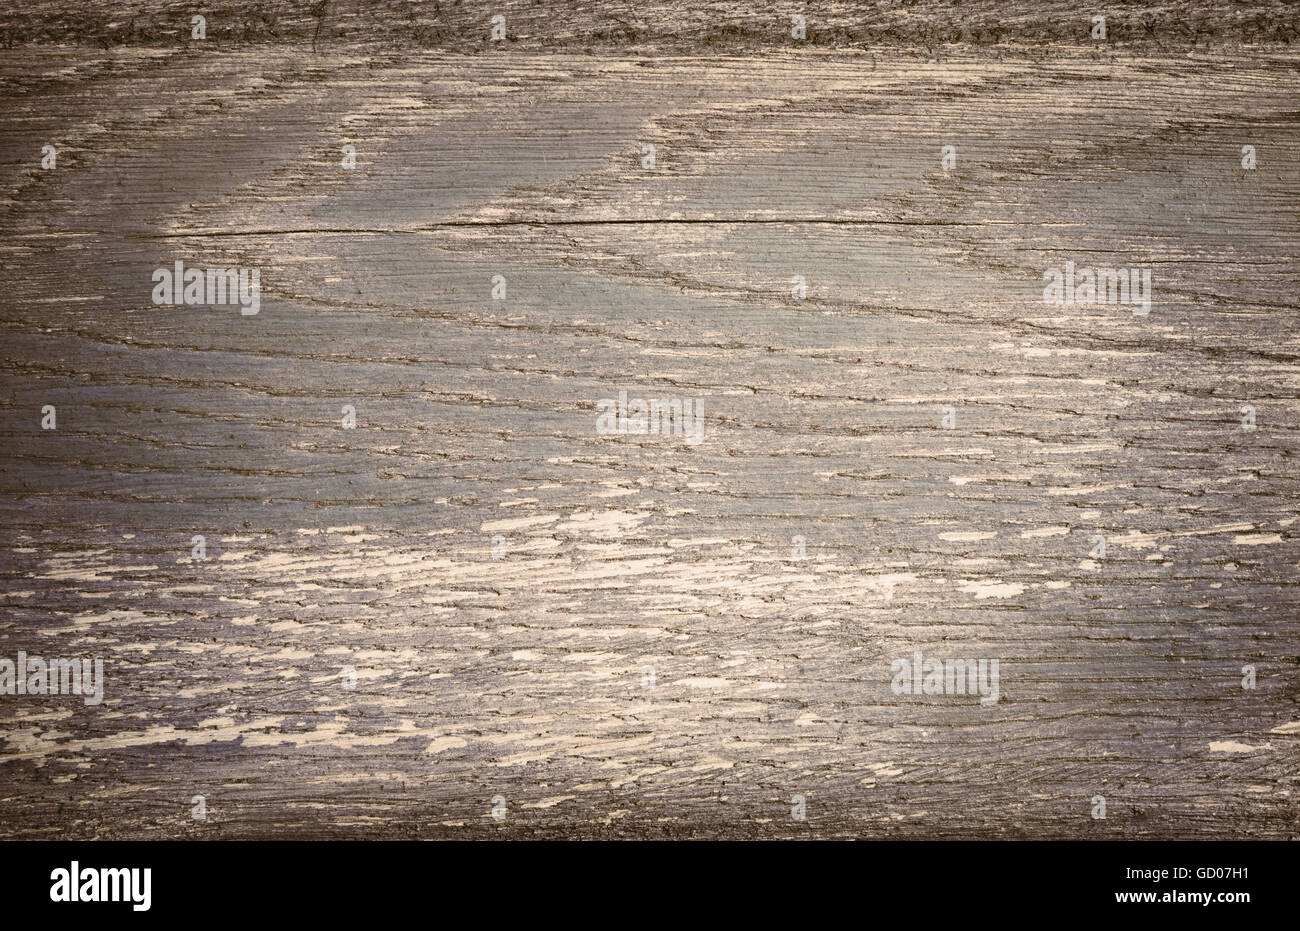 Dark gray scratched wooden plank. Wood texture Stock Photo